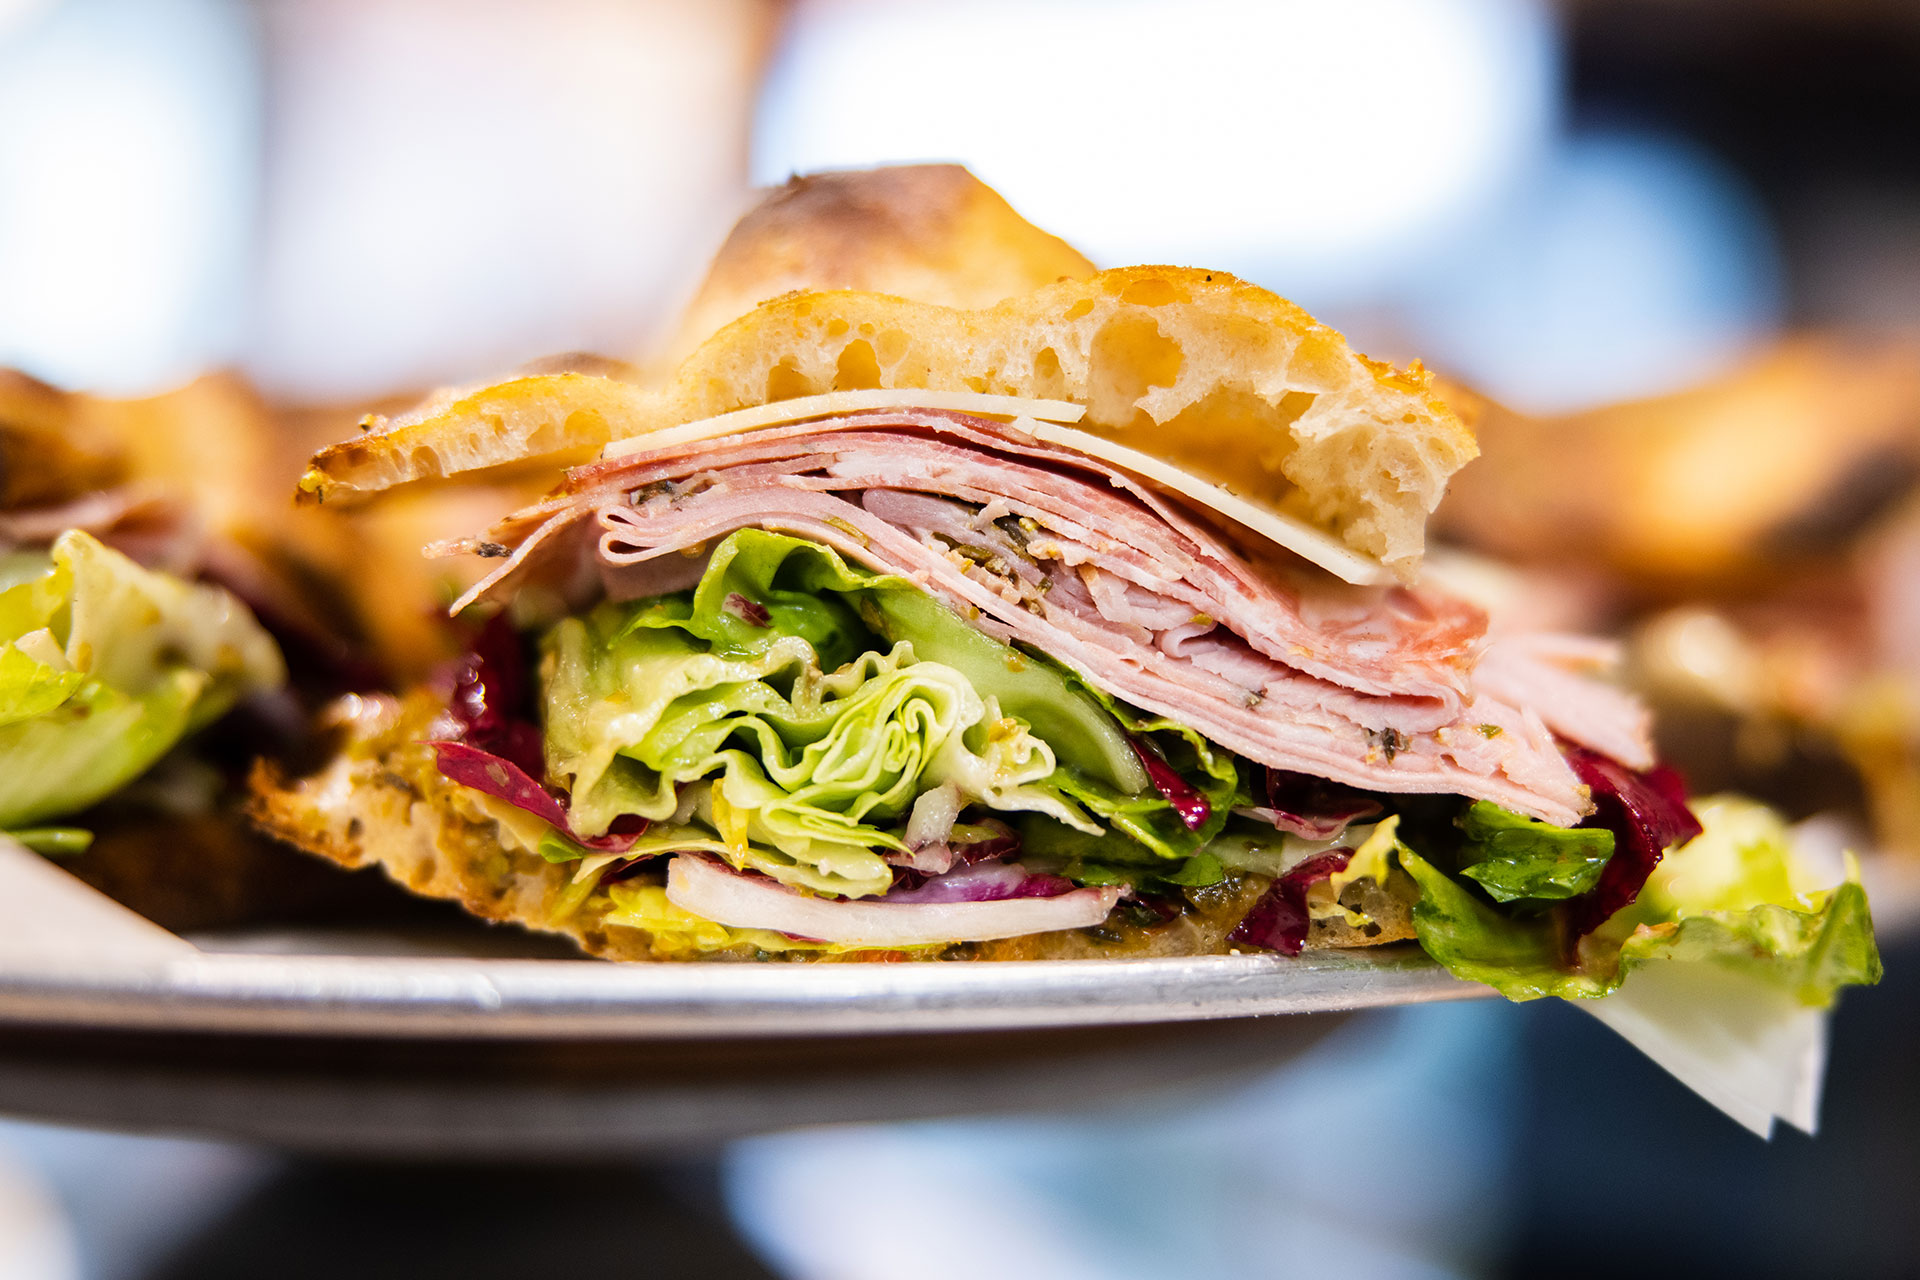 a pizza thief focaccia sandwich with deli meats and greens on a plate held by a server